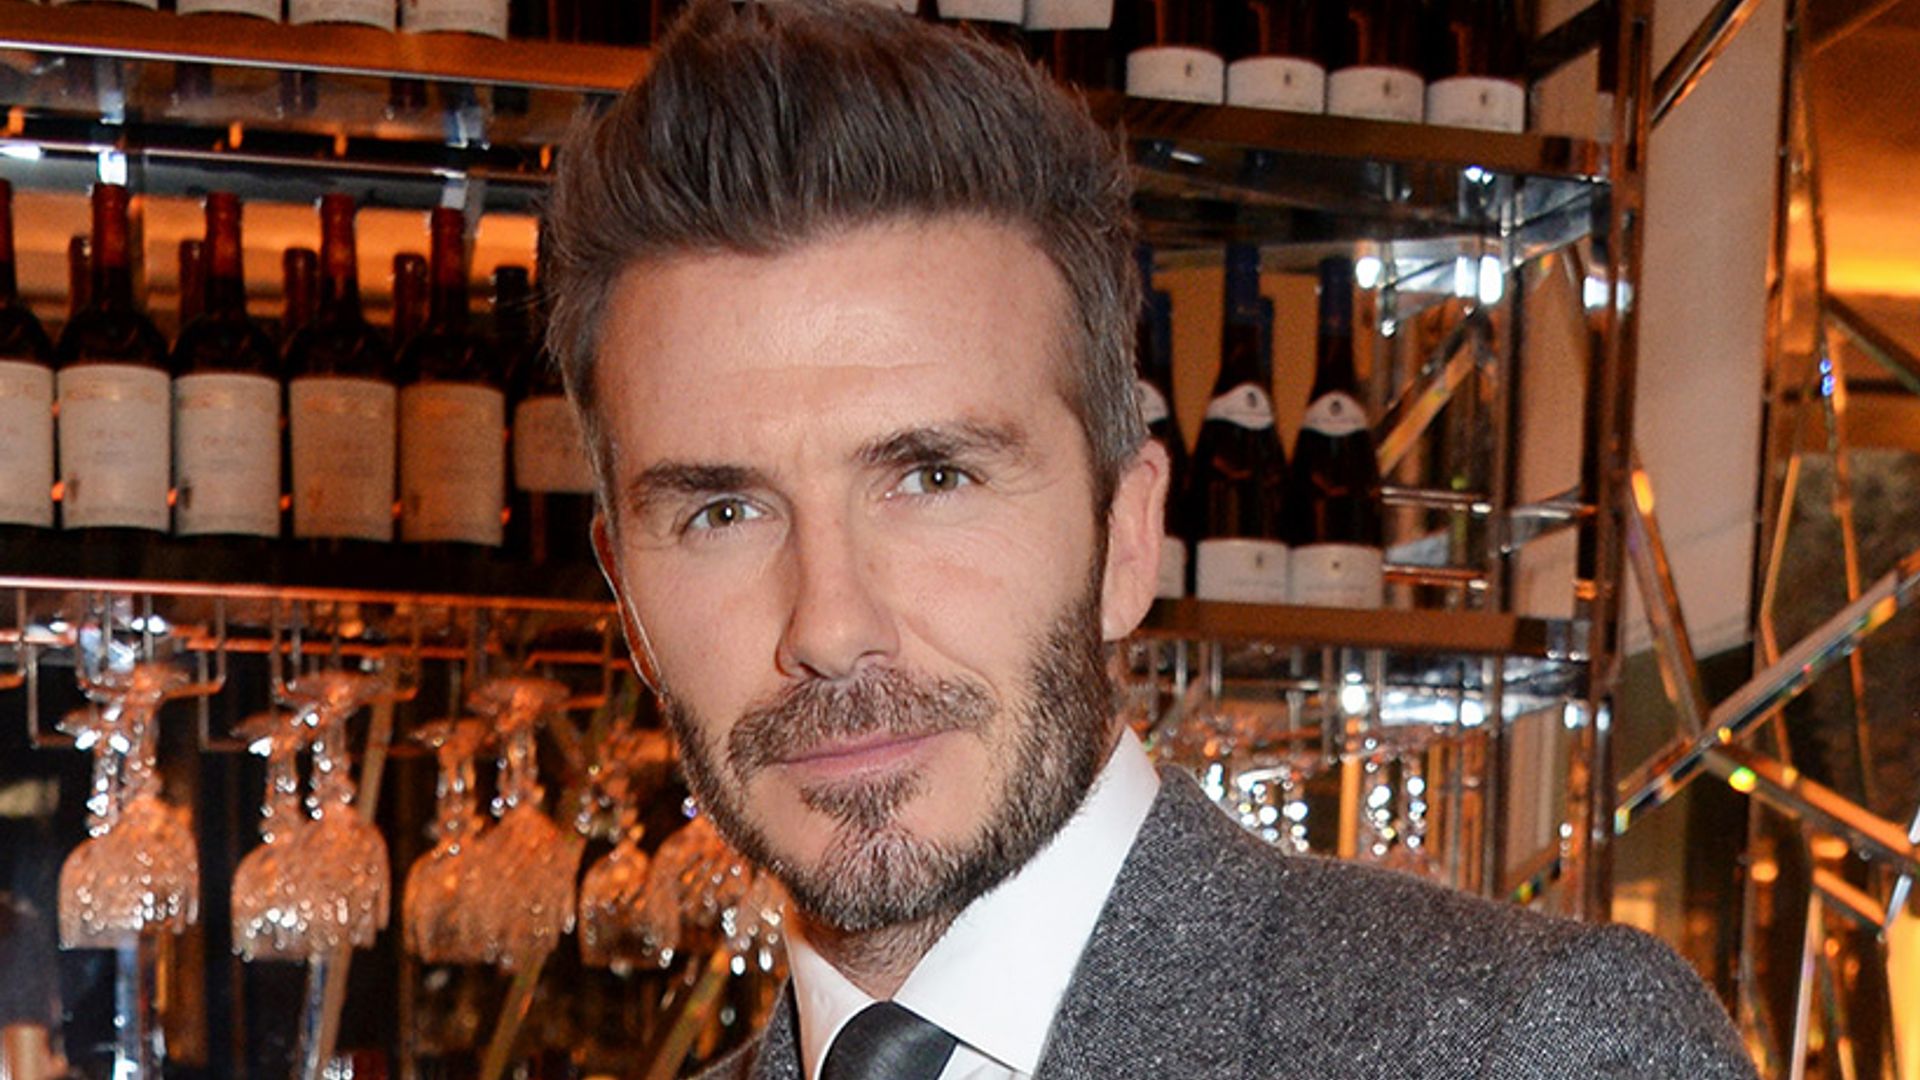 Has David Beckham had hair growth treatment? See the before and after pics